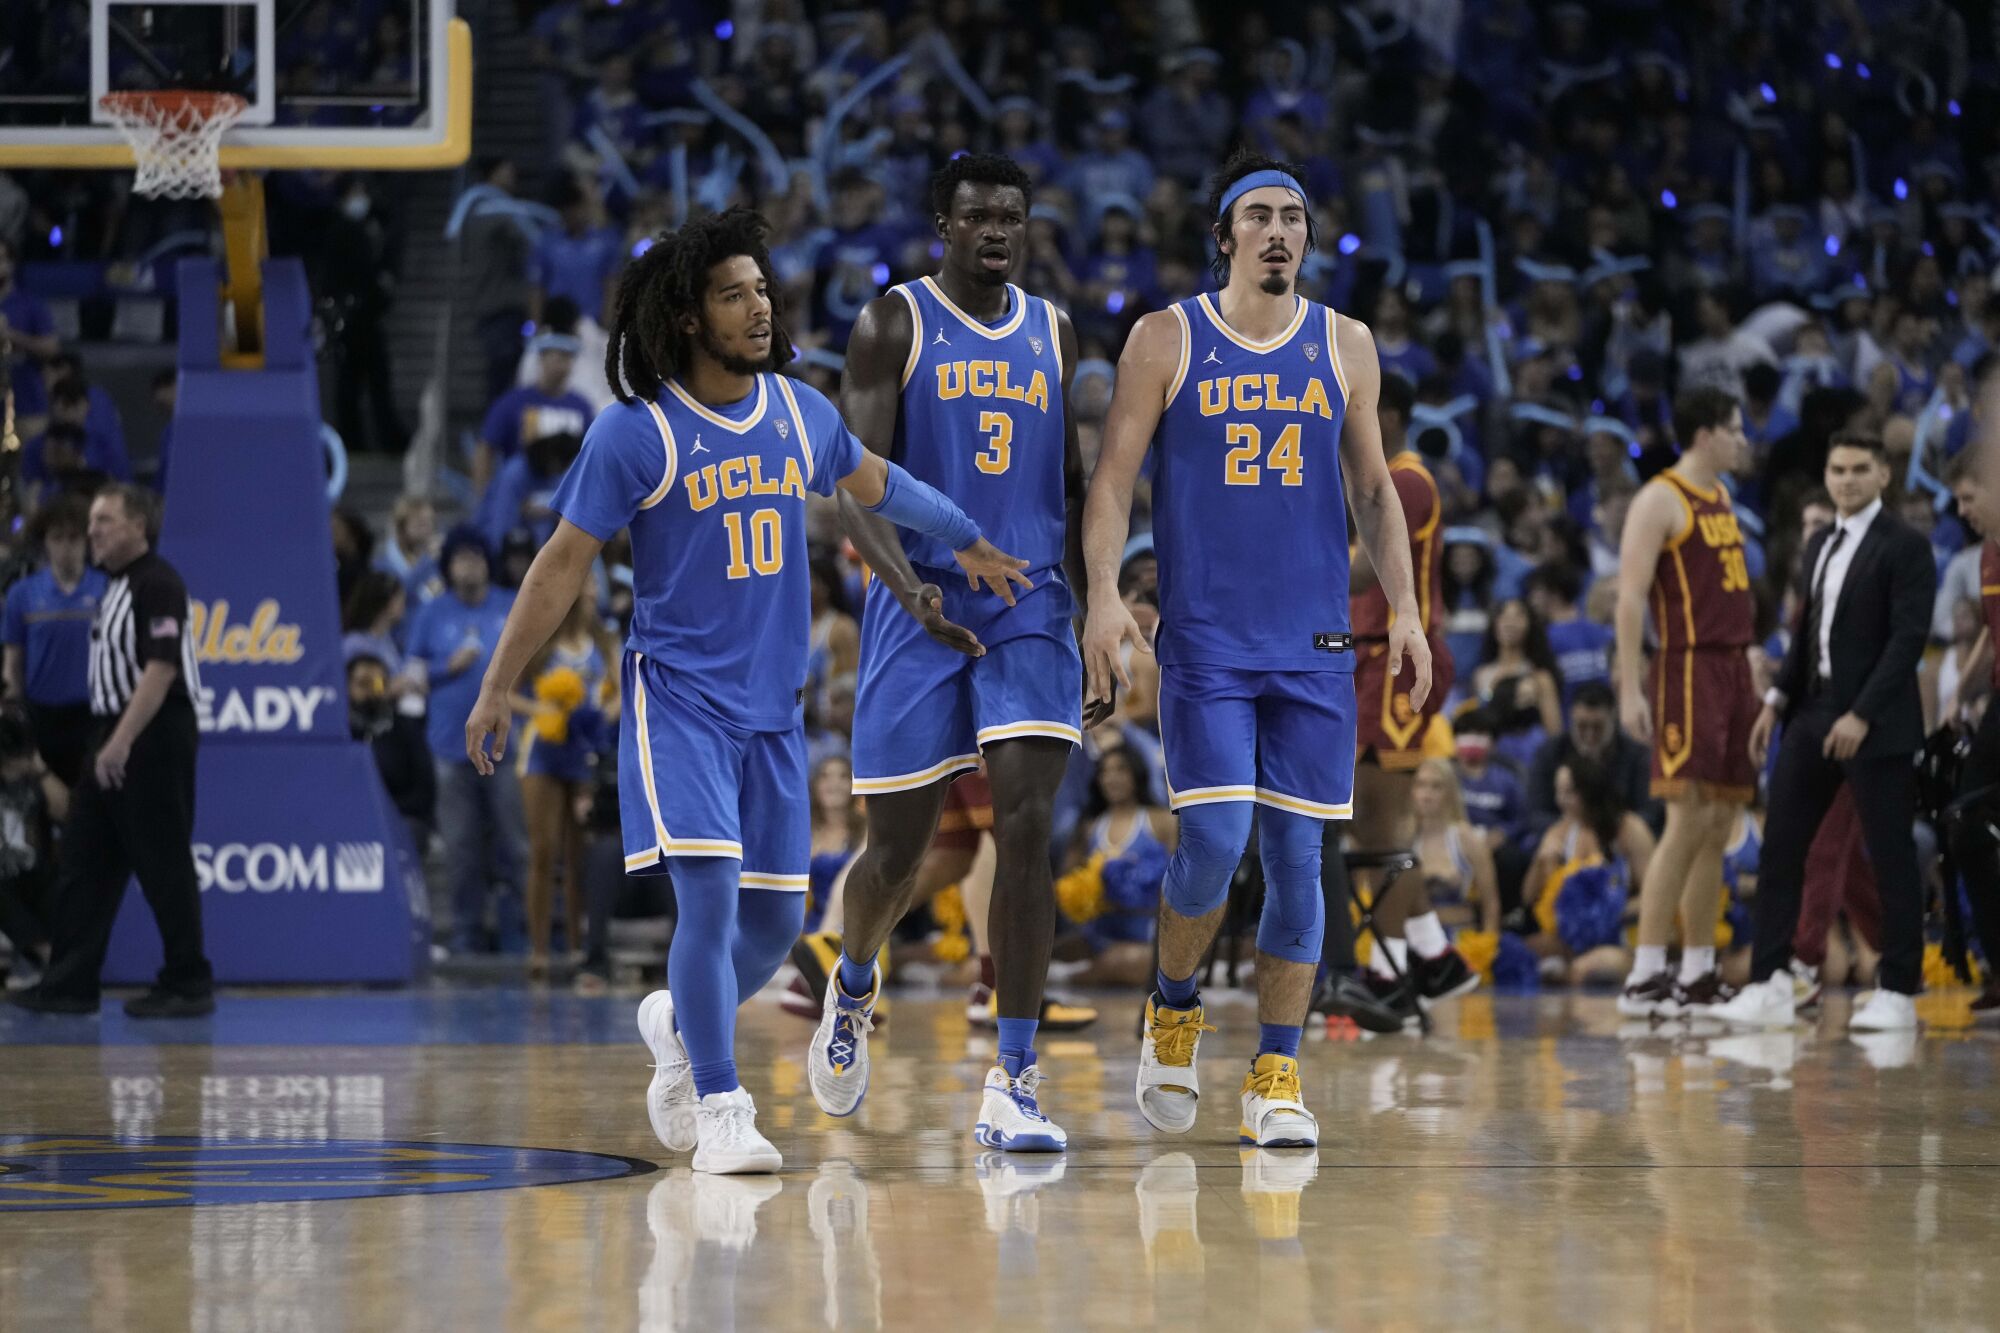 UCLA's Tyger Campbell, Adem Bona, and Jaime Jaquez Jr. walk the court in the second half against USC.